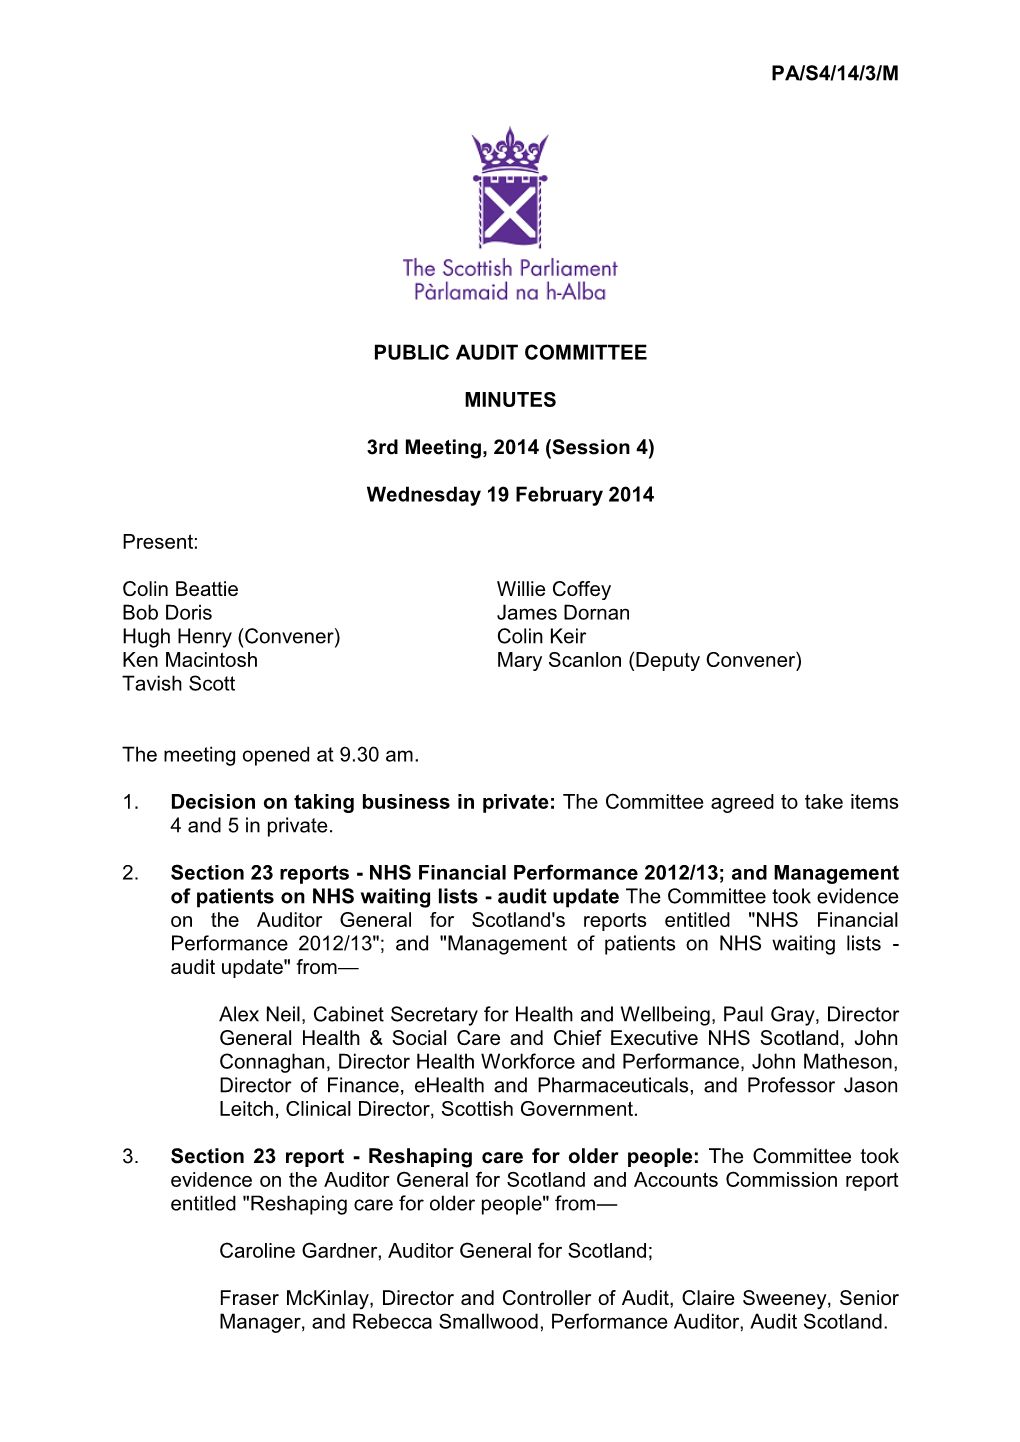 PA/S4/14/3/M PUBLIC AUDIT COMMITTEE MINUTES 3Rd Meeting